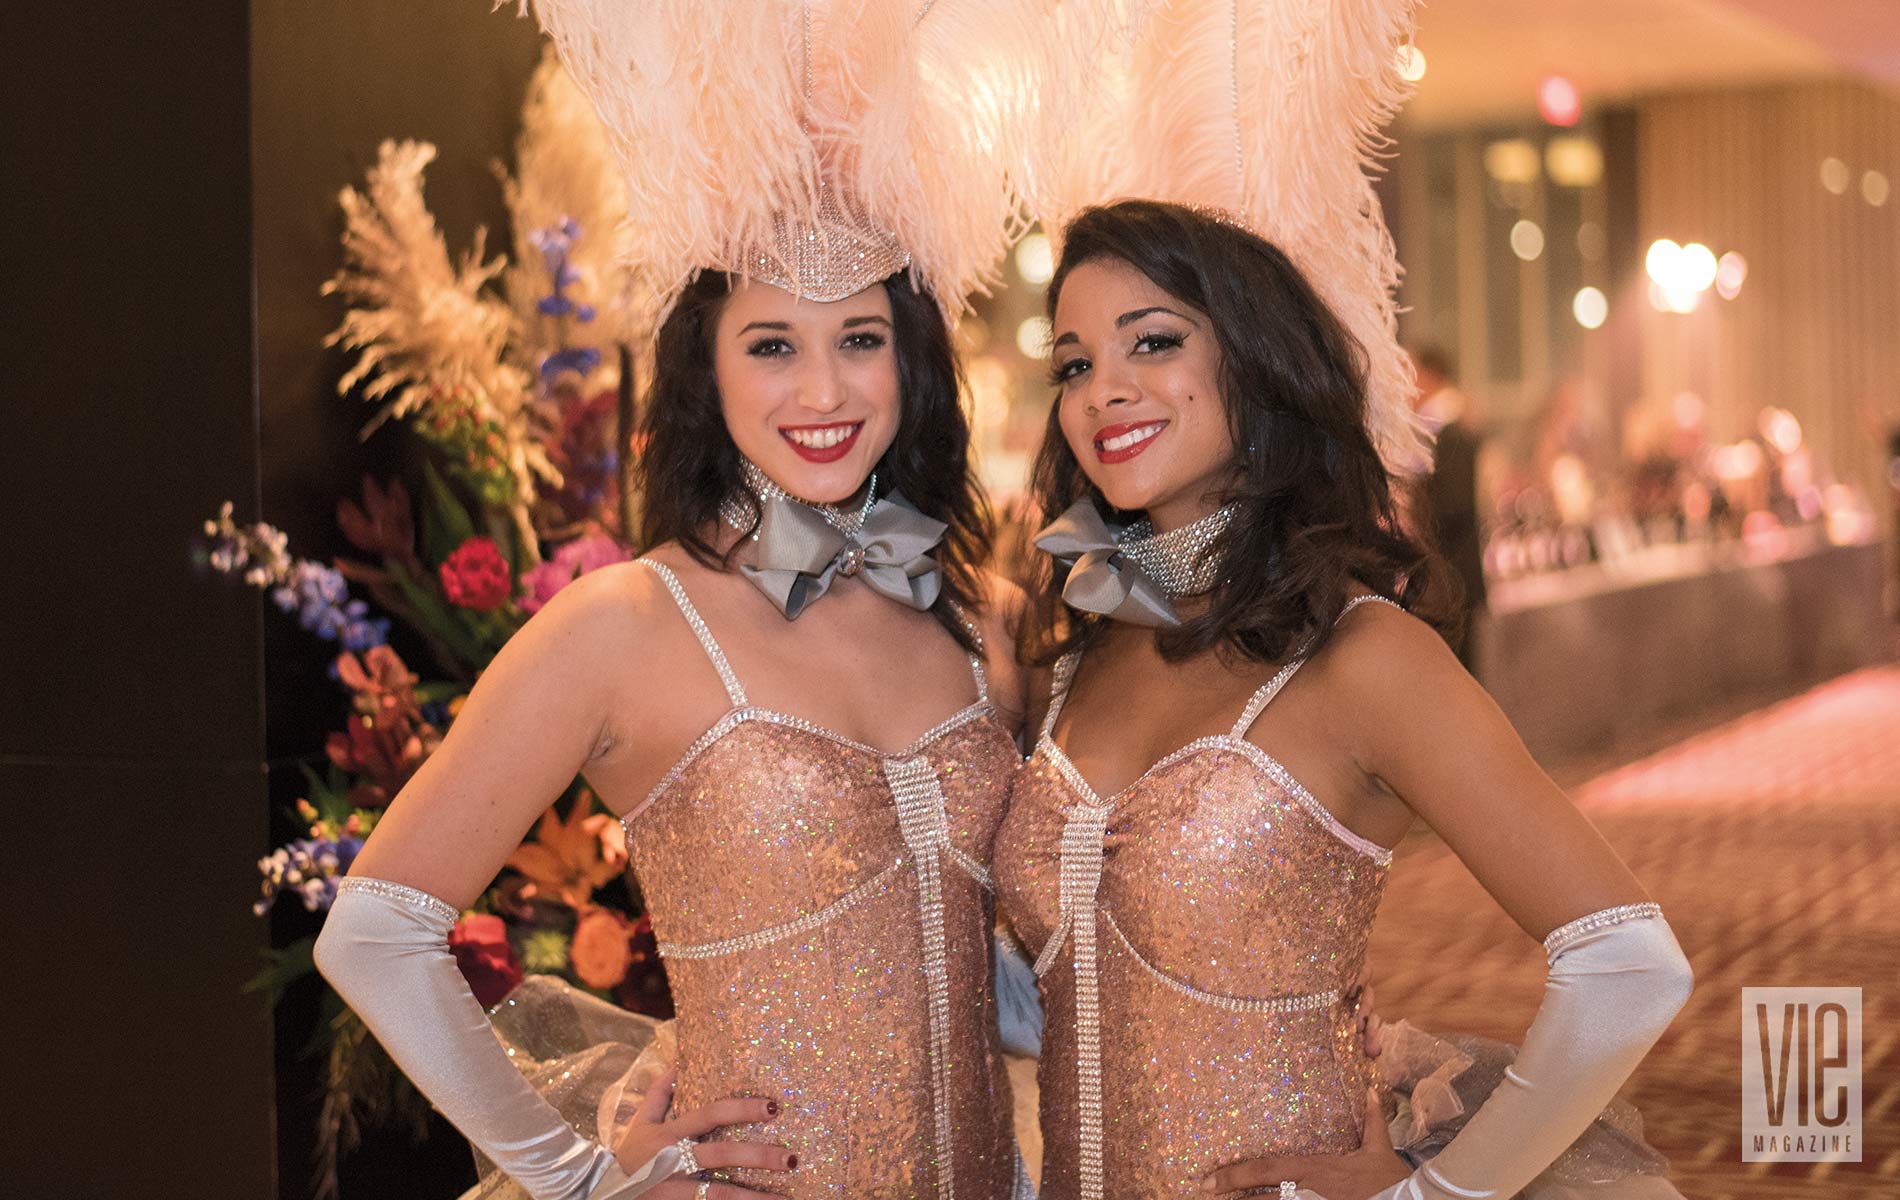 The Carnivale showgirls parading throughout the banquet hall and taking photos with guests provided a fun ambience in keeping with the theme of the evening. Photo by Gerald Burwell.